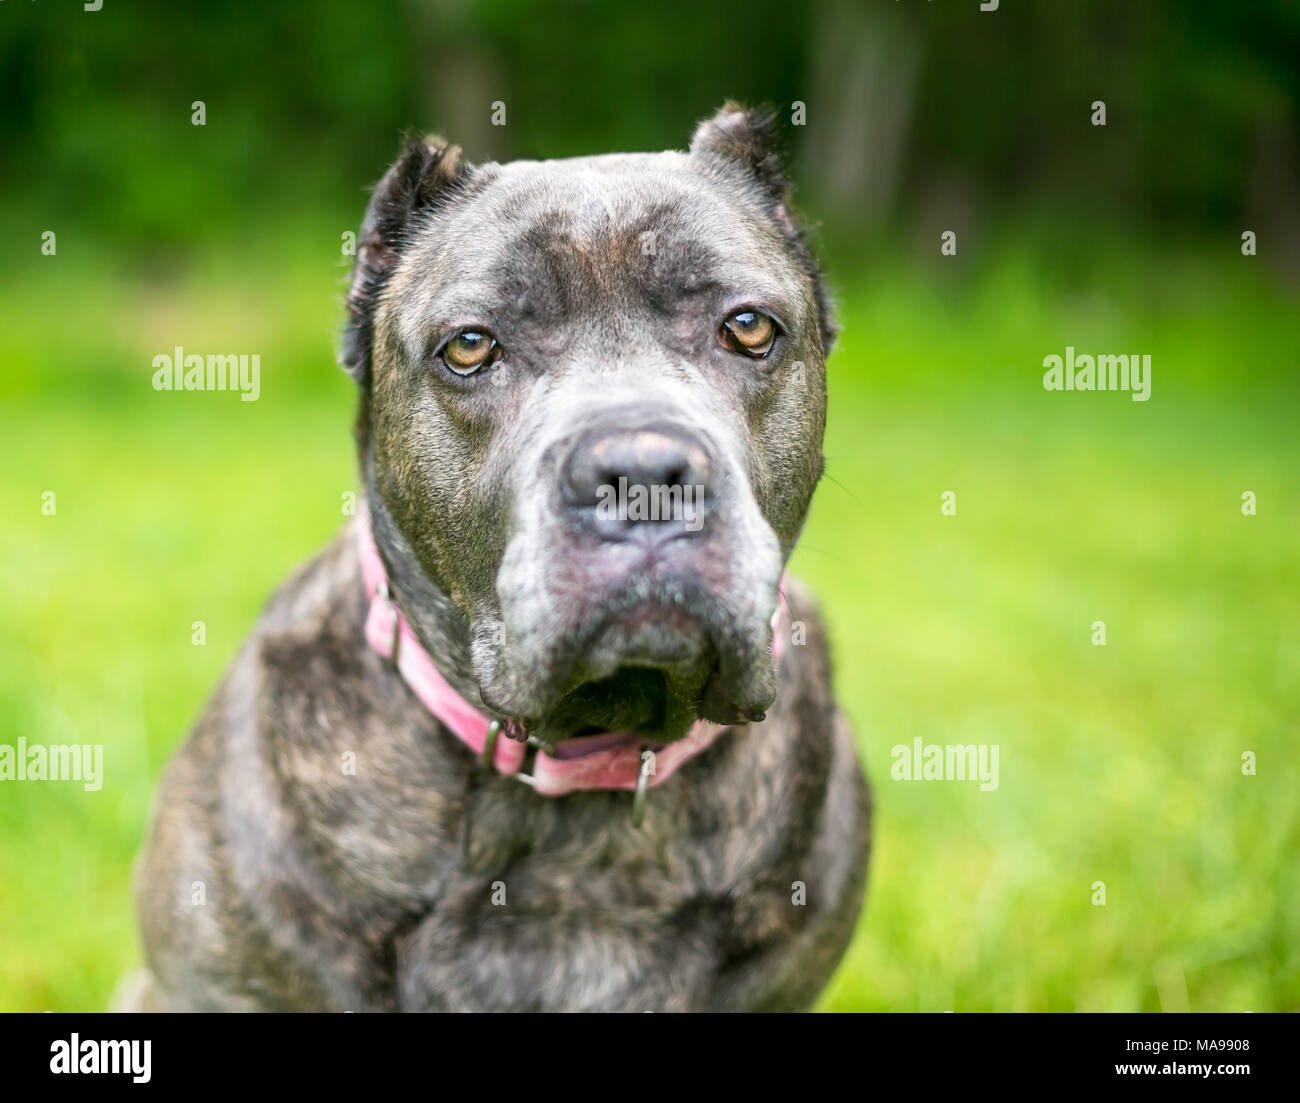 A Cane Corso mixed breed dog with cropped ears and a grumpy expression Stock Photo